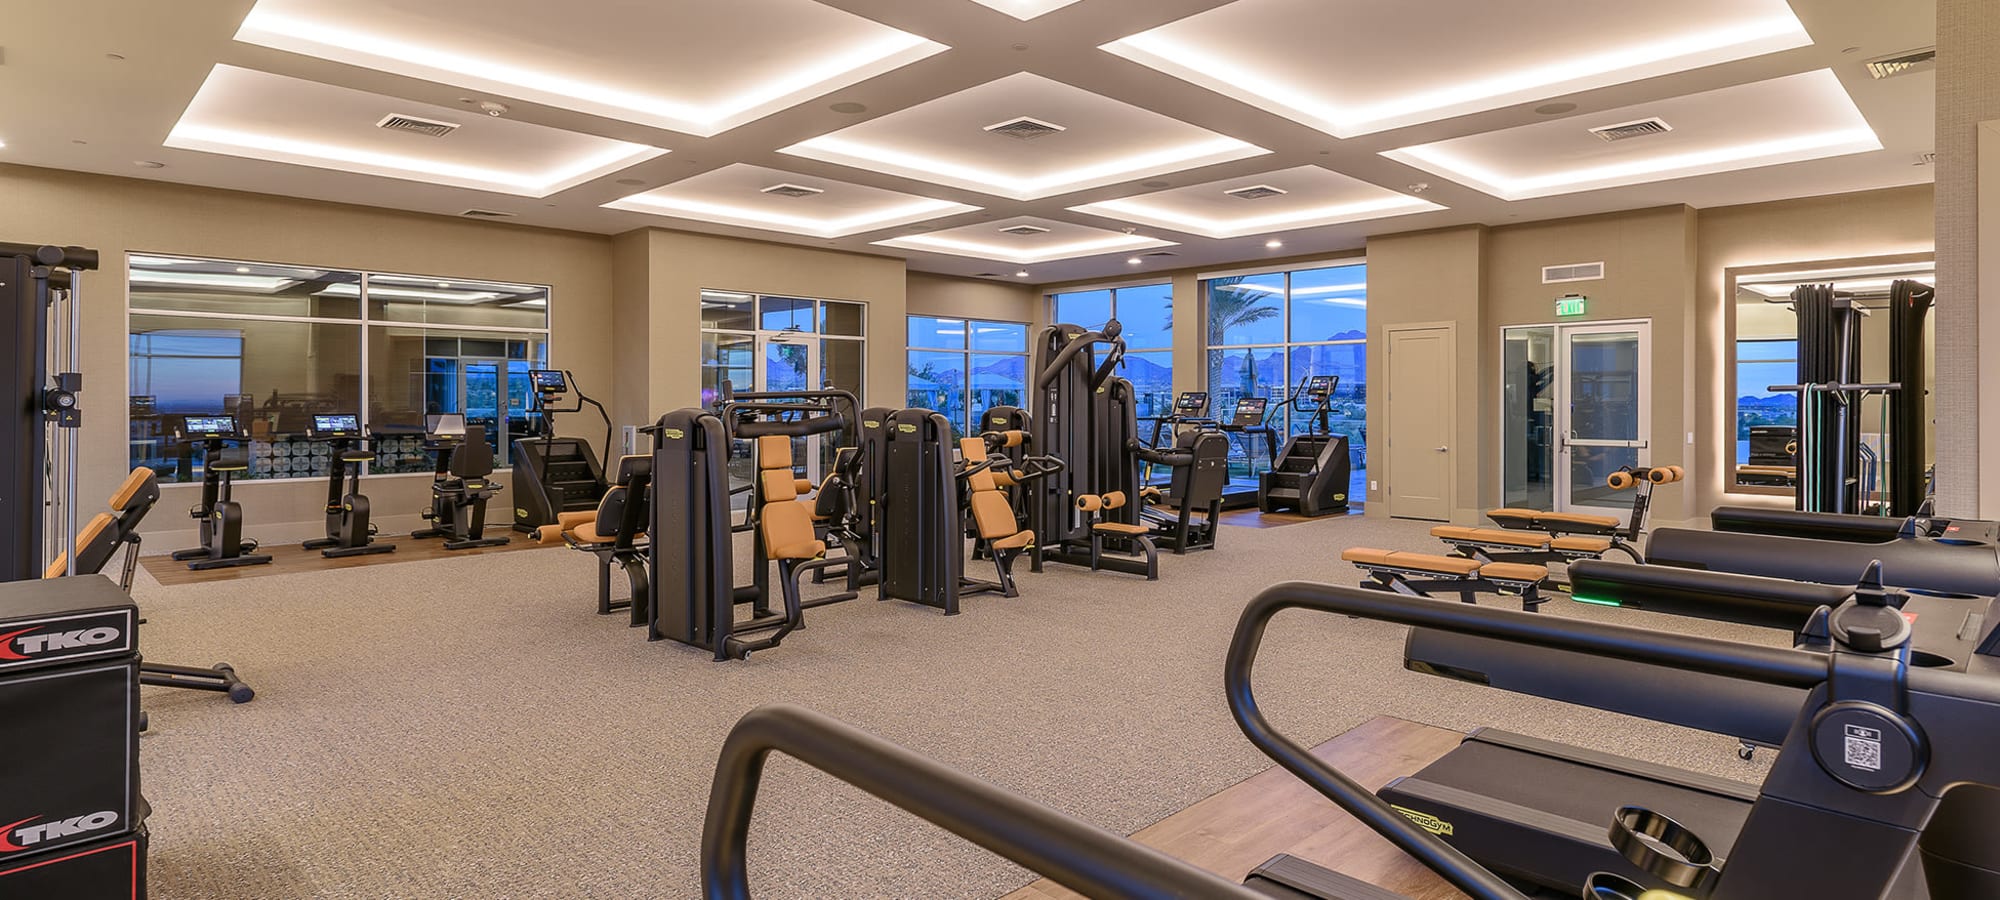 Fitness Center at The Halsten at Chauncey Lane | Apartments in Scottsdale, Arizona